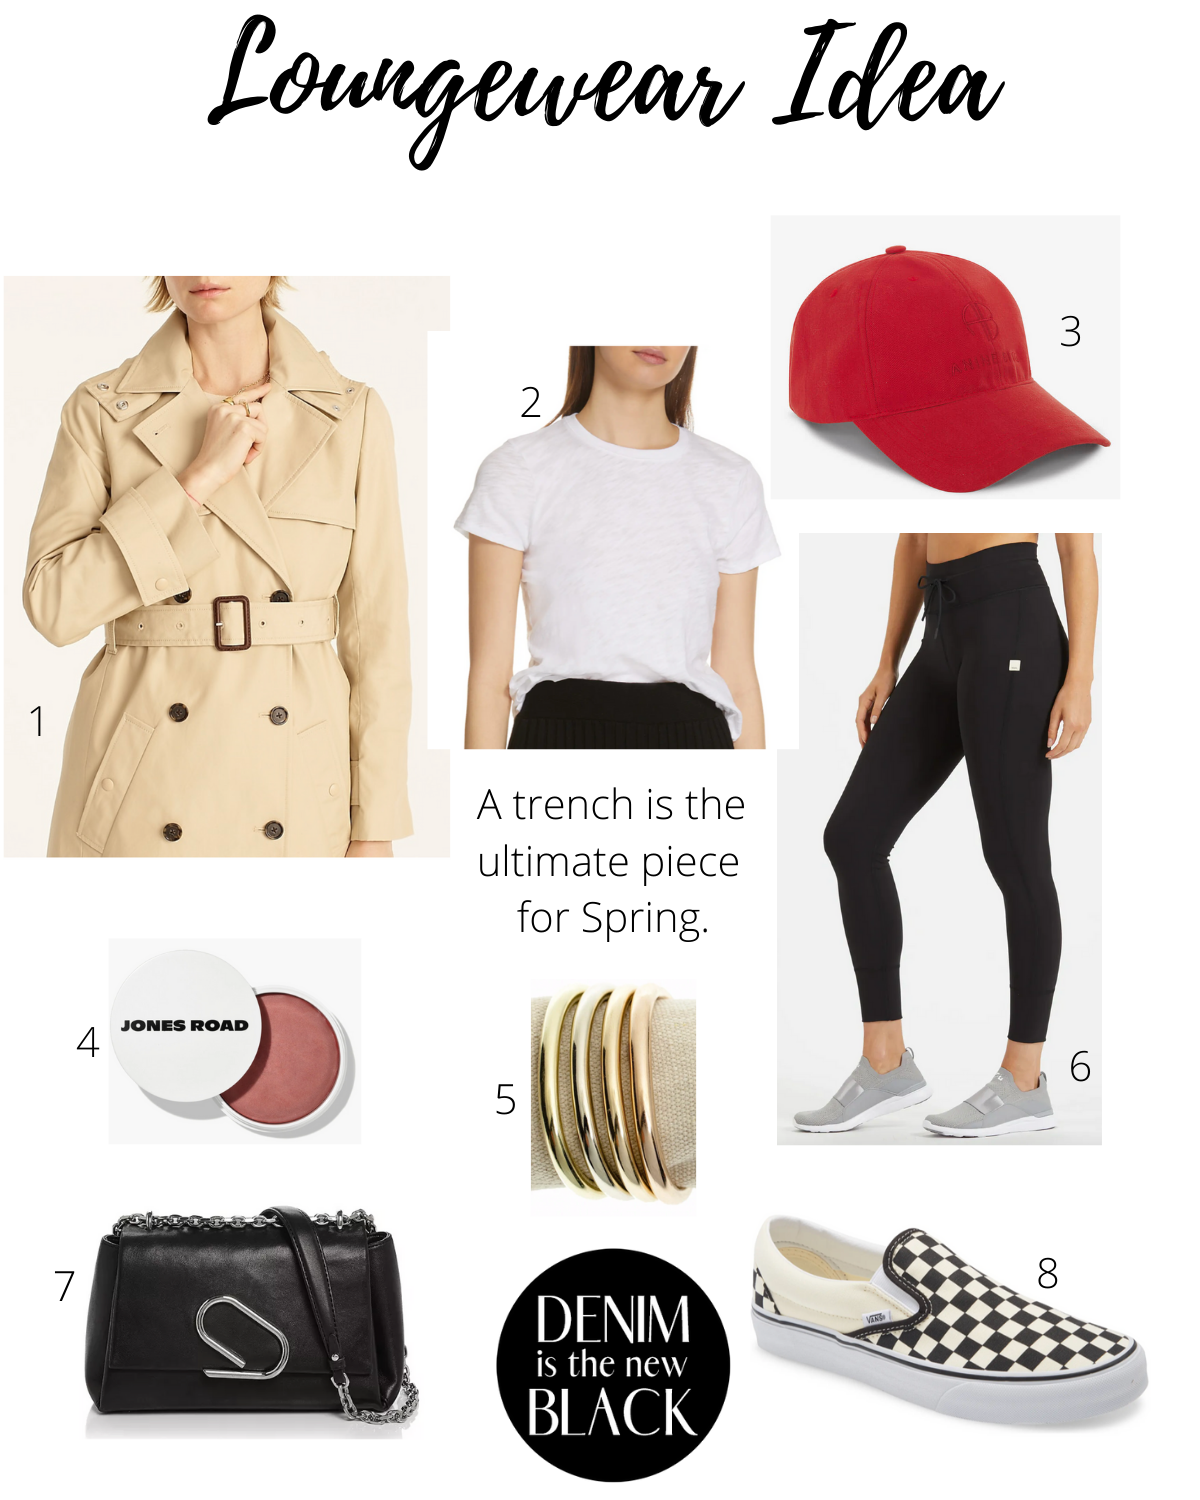 How to look good in loungewear for spring with a trench coat and classic checkered Vans sneakers.